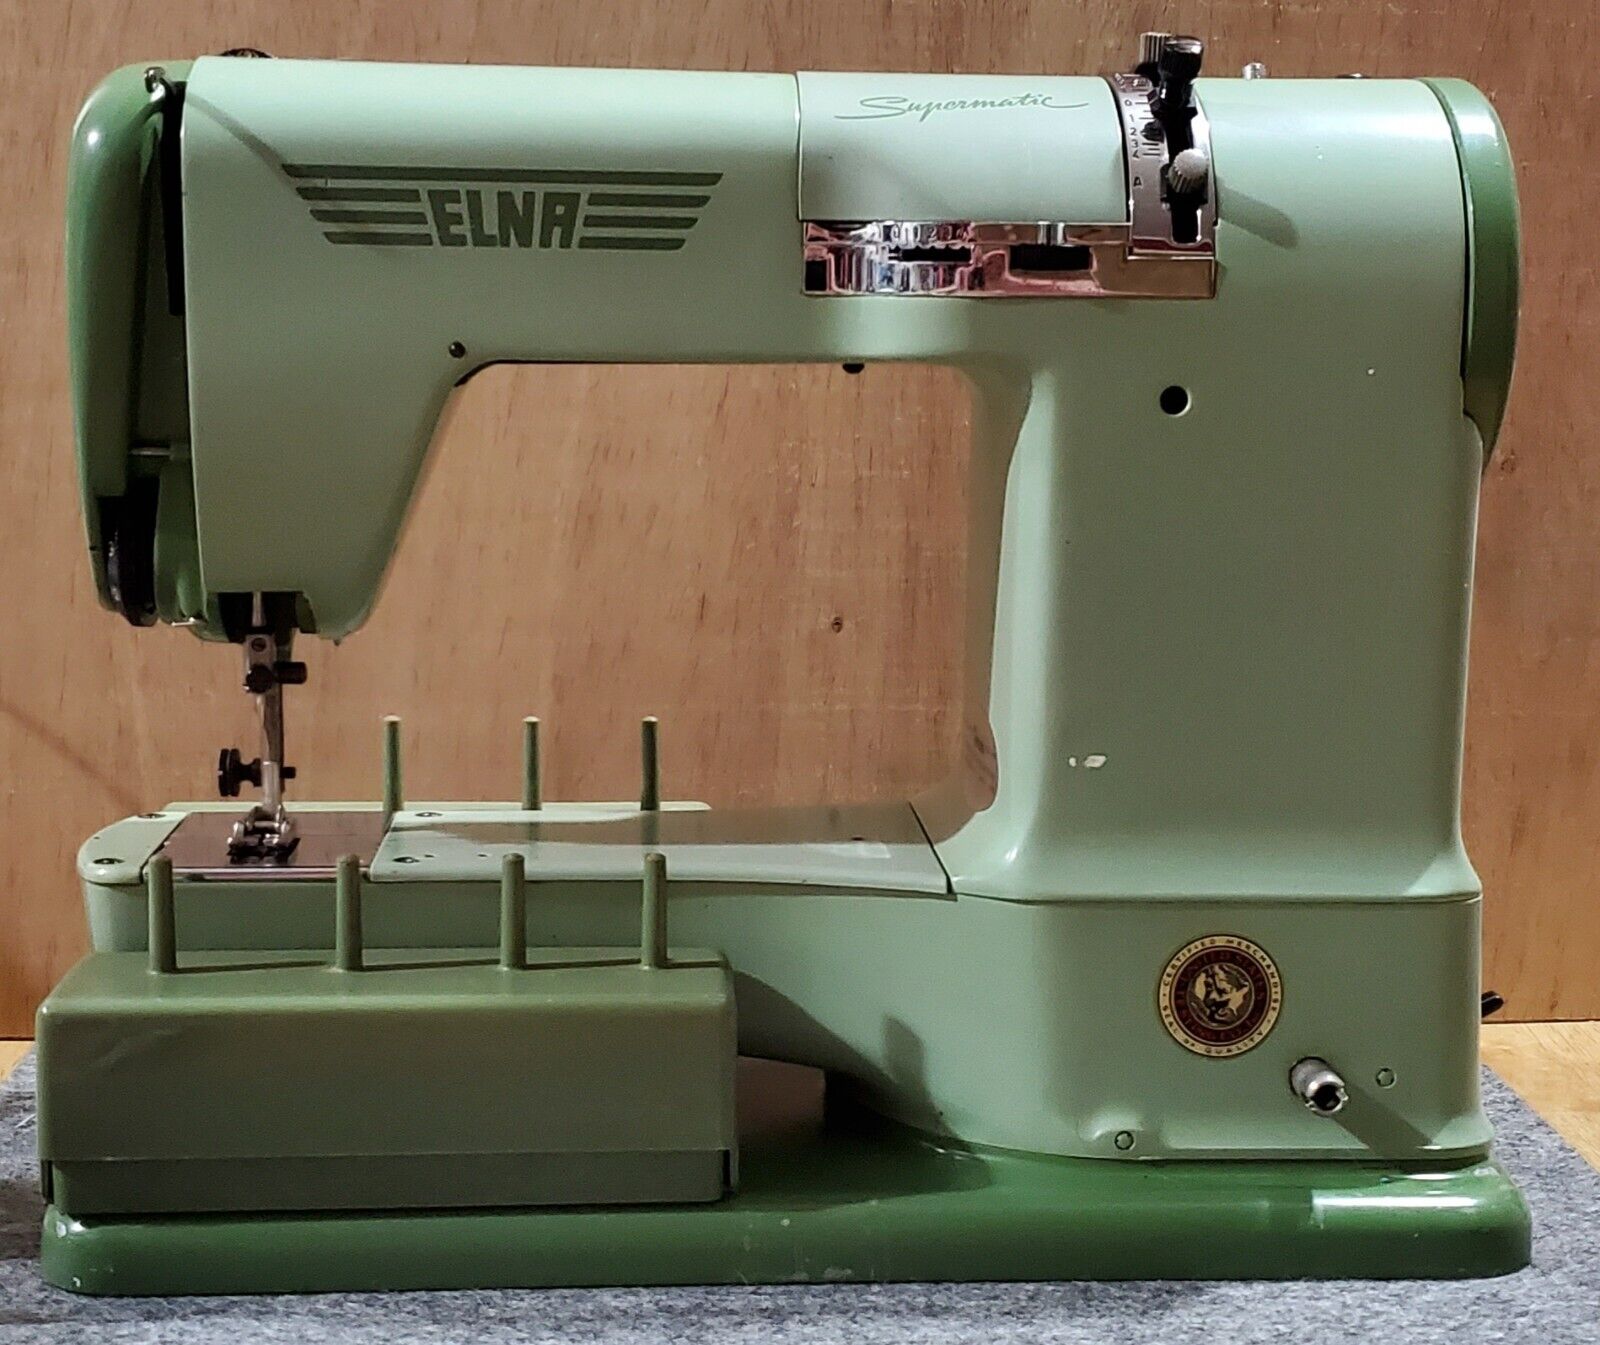 Vintage Elna Supermatic Sewing Machine with Metal Case 722010 1957 2-tone Green 